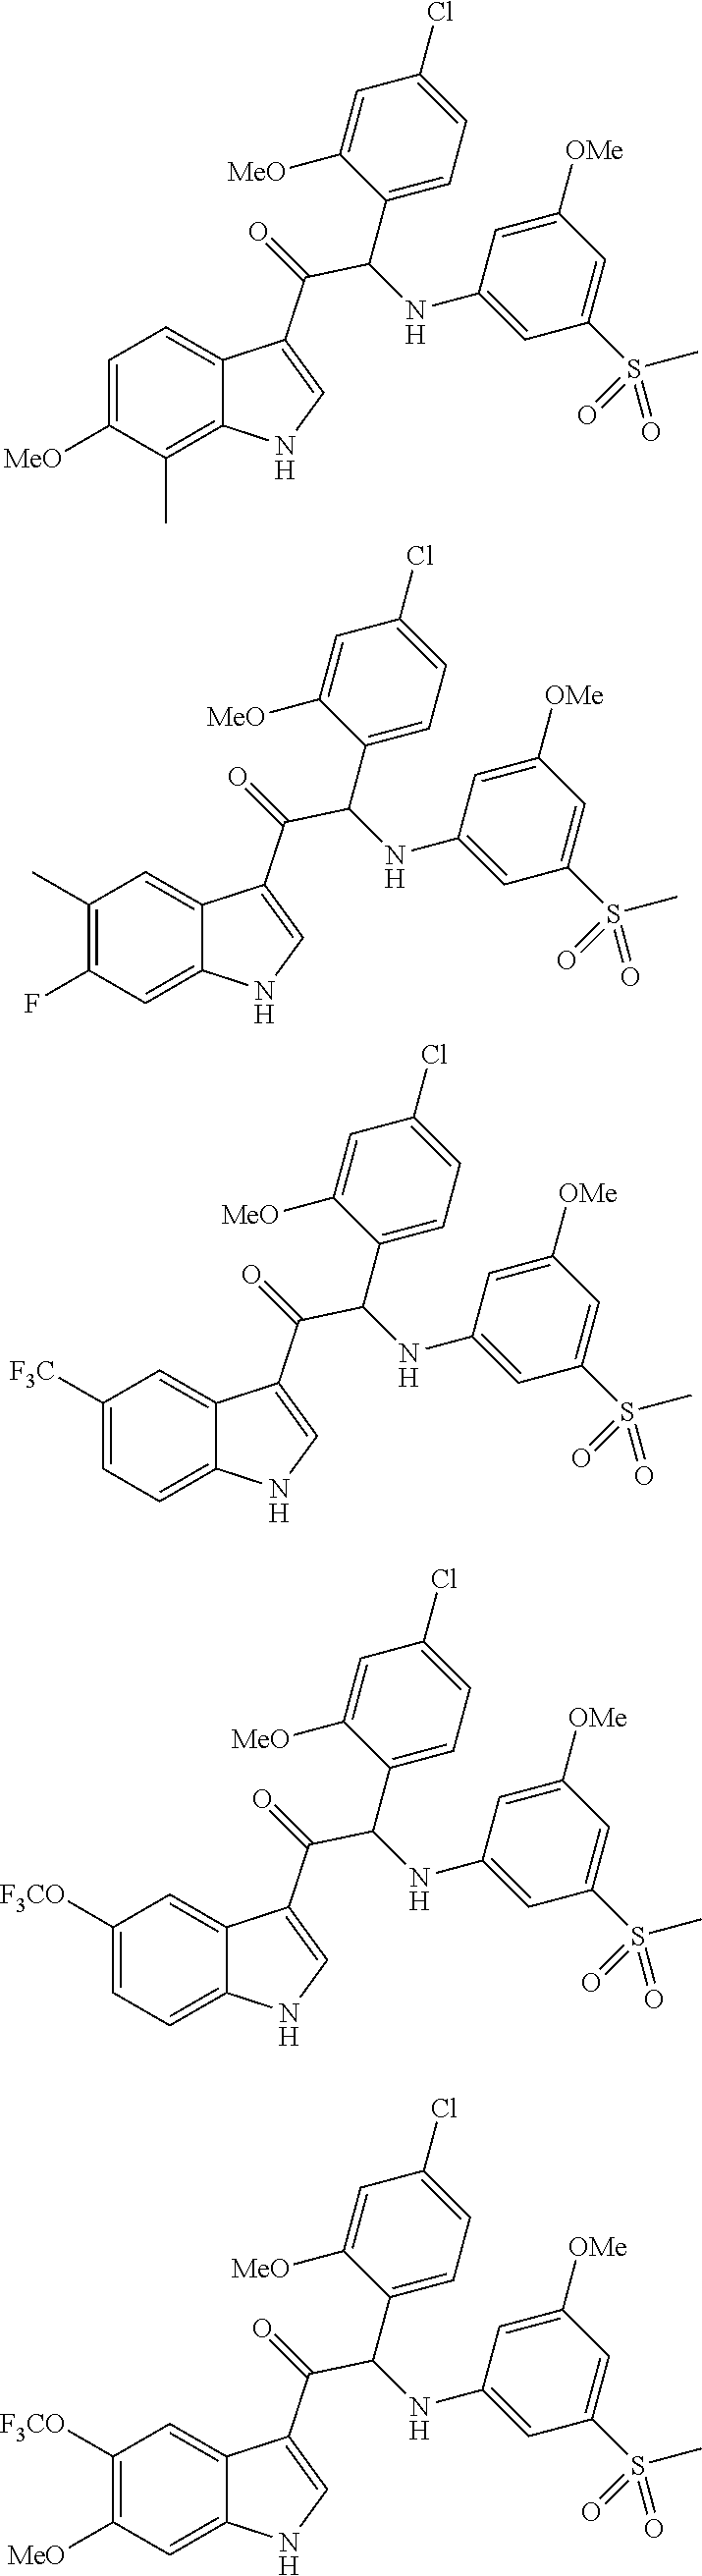 Mono- or di-substituted indole derivatives as dengue viral replication inhibitors